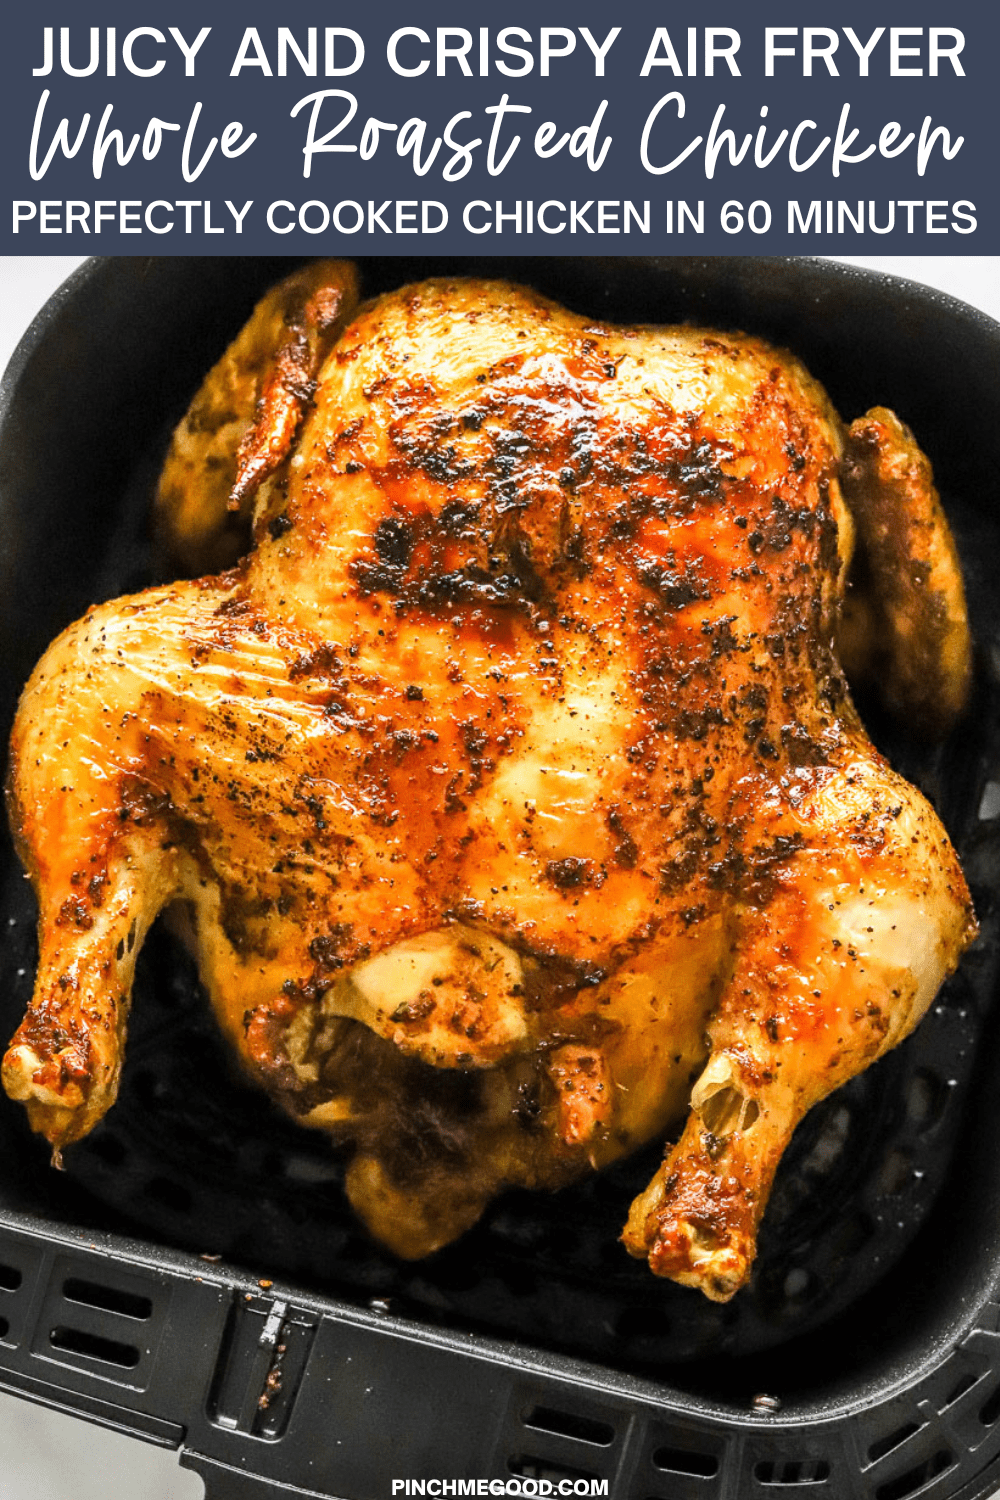 Air Fryer Whole Chicken - Crispy and Juicy - Pinch Me Good